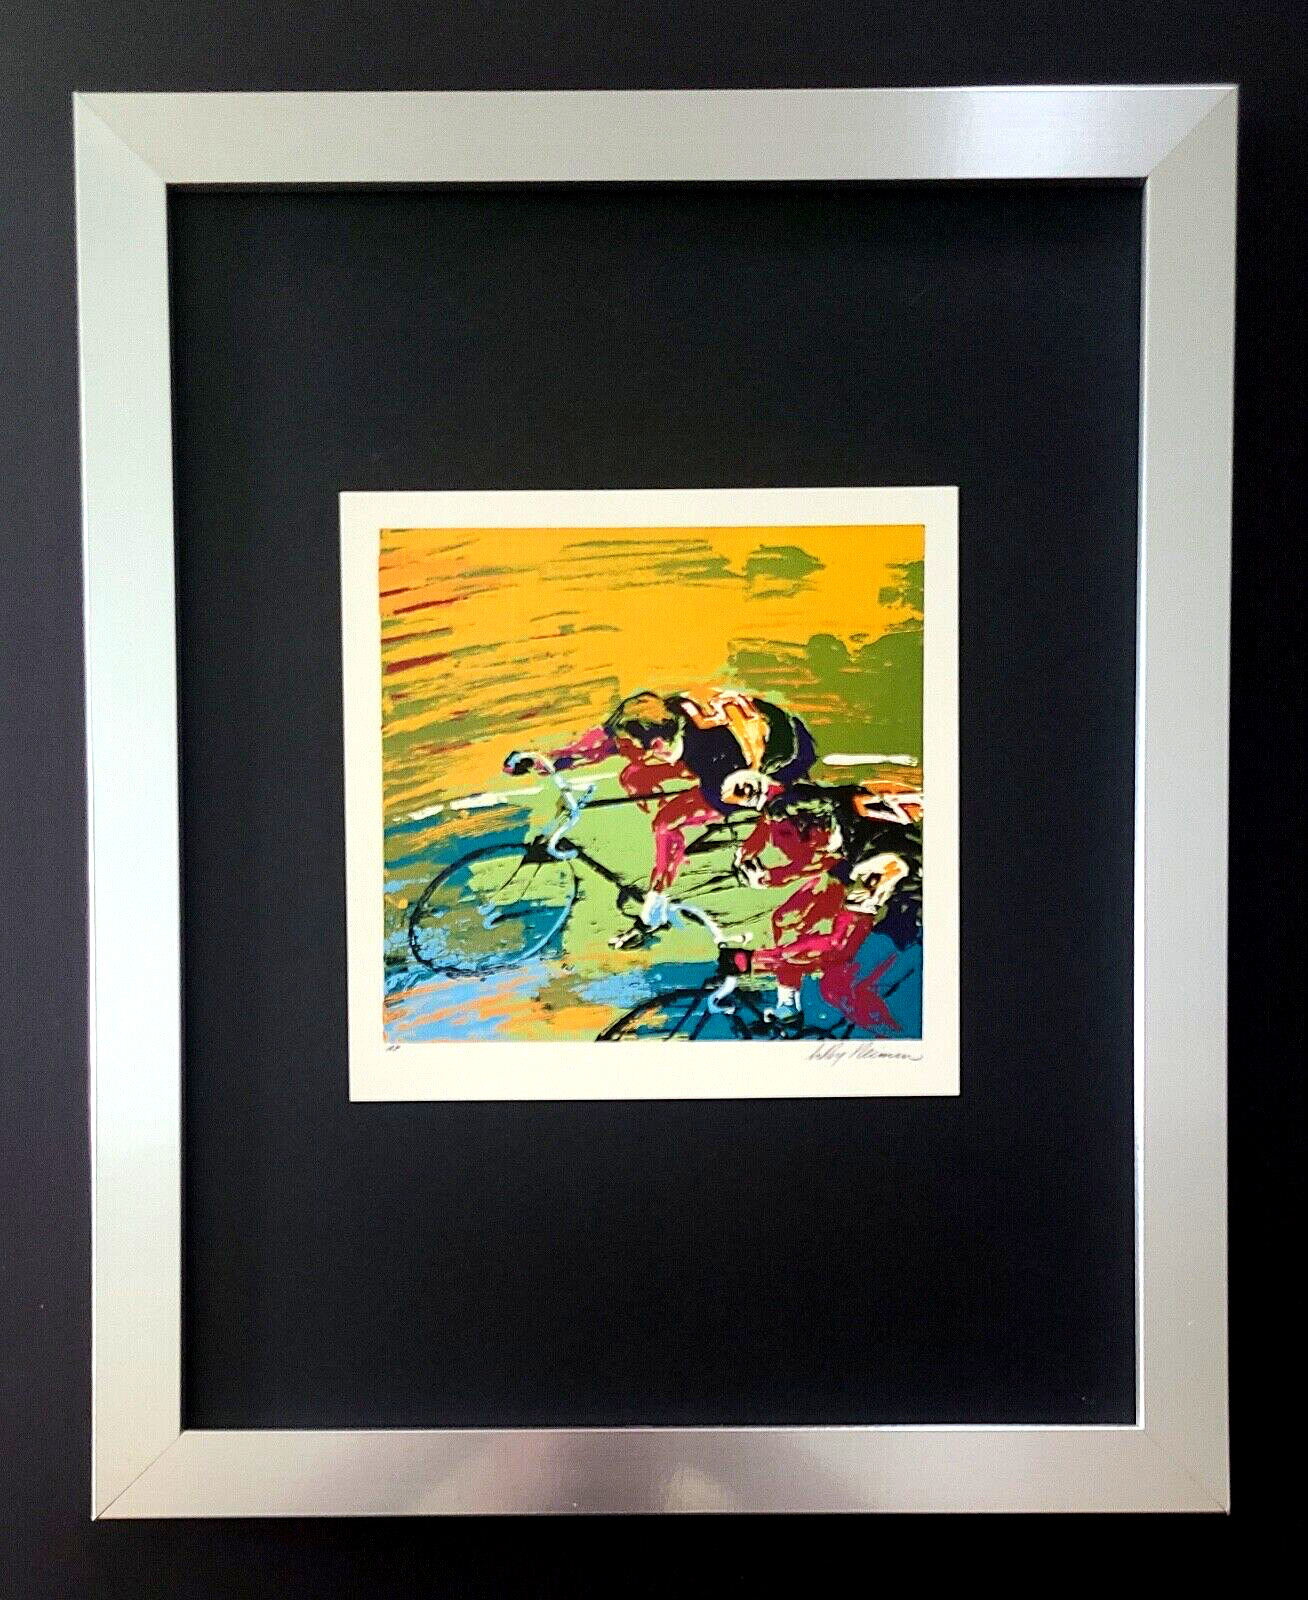 LEROY NEIMAN +  CYCLING + CIRCA 1990'S + SIGNED PRINT FRAMED + BUY NOW